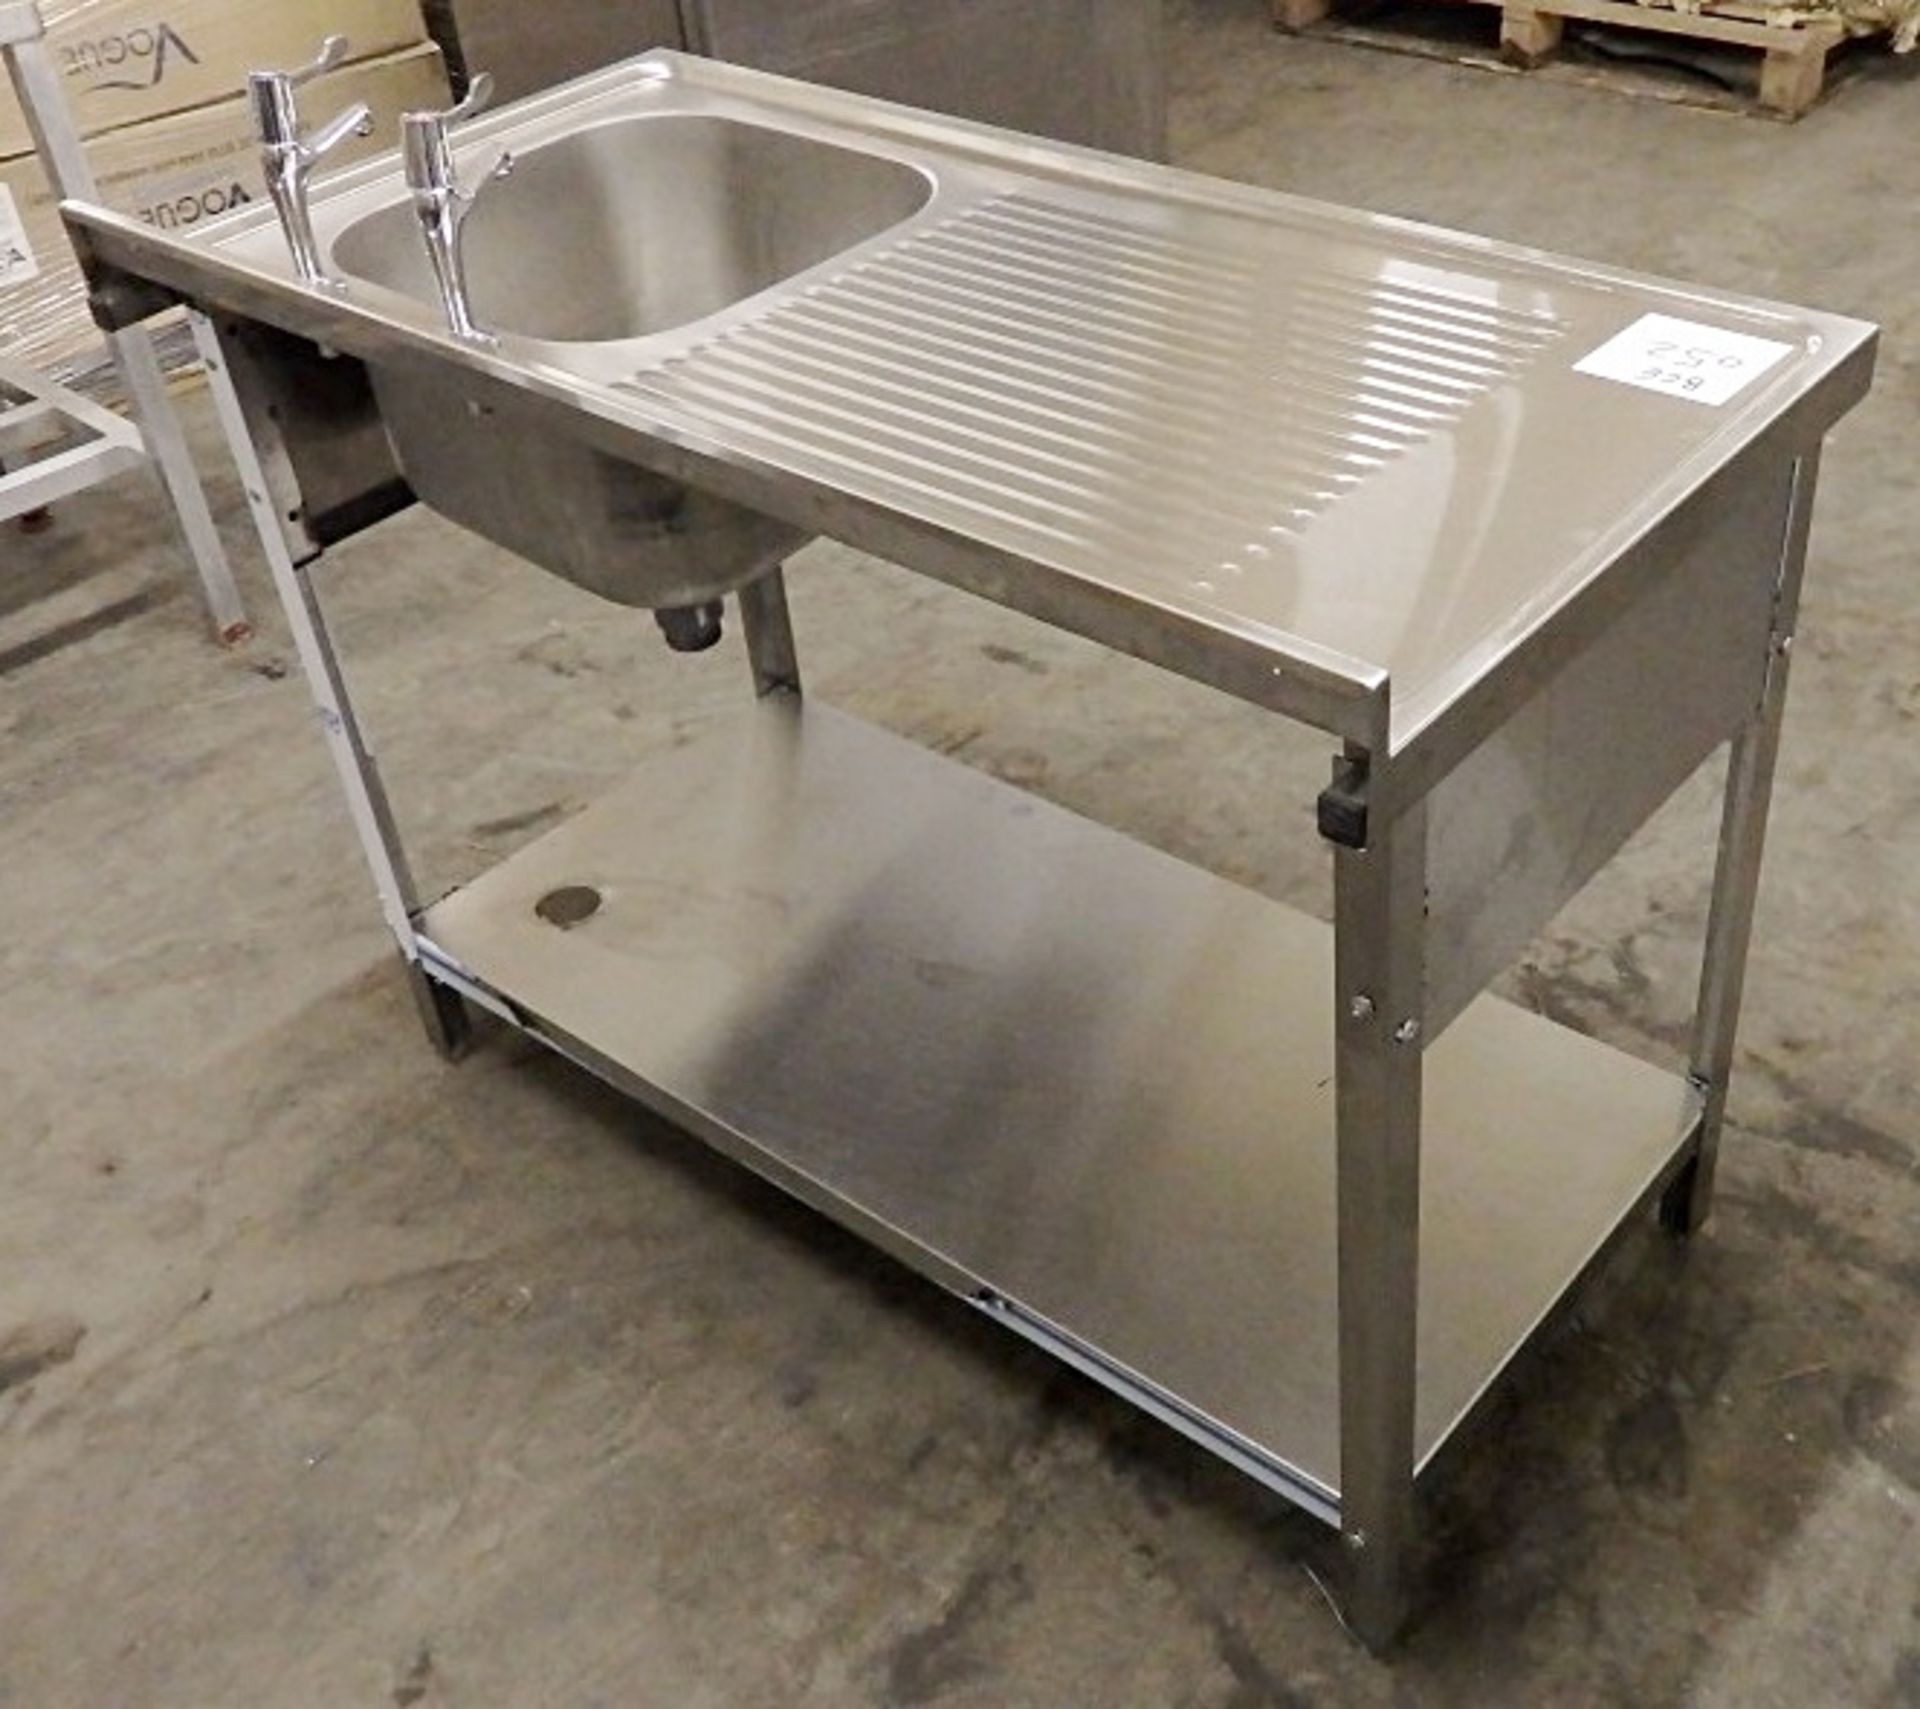 1 x Freestanding Commercial Stainless Steel Sink Unit - Dimensions: W120 x D60 x H92cm - Ref: BCE052 - Image 6 of 8